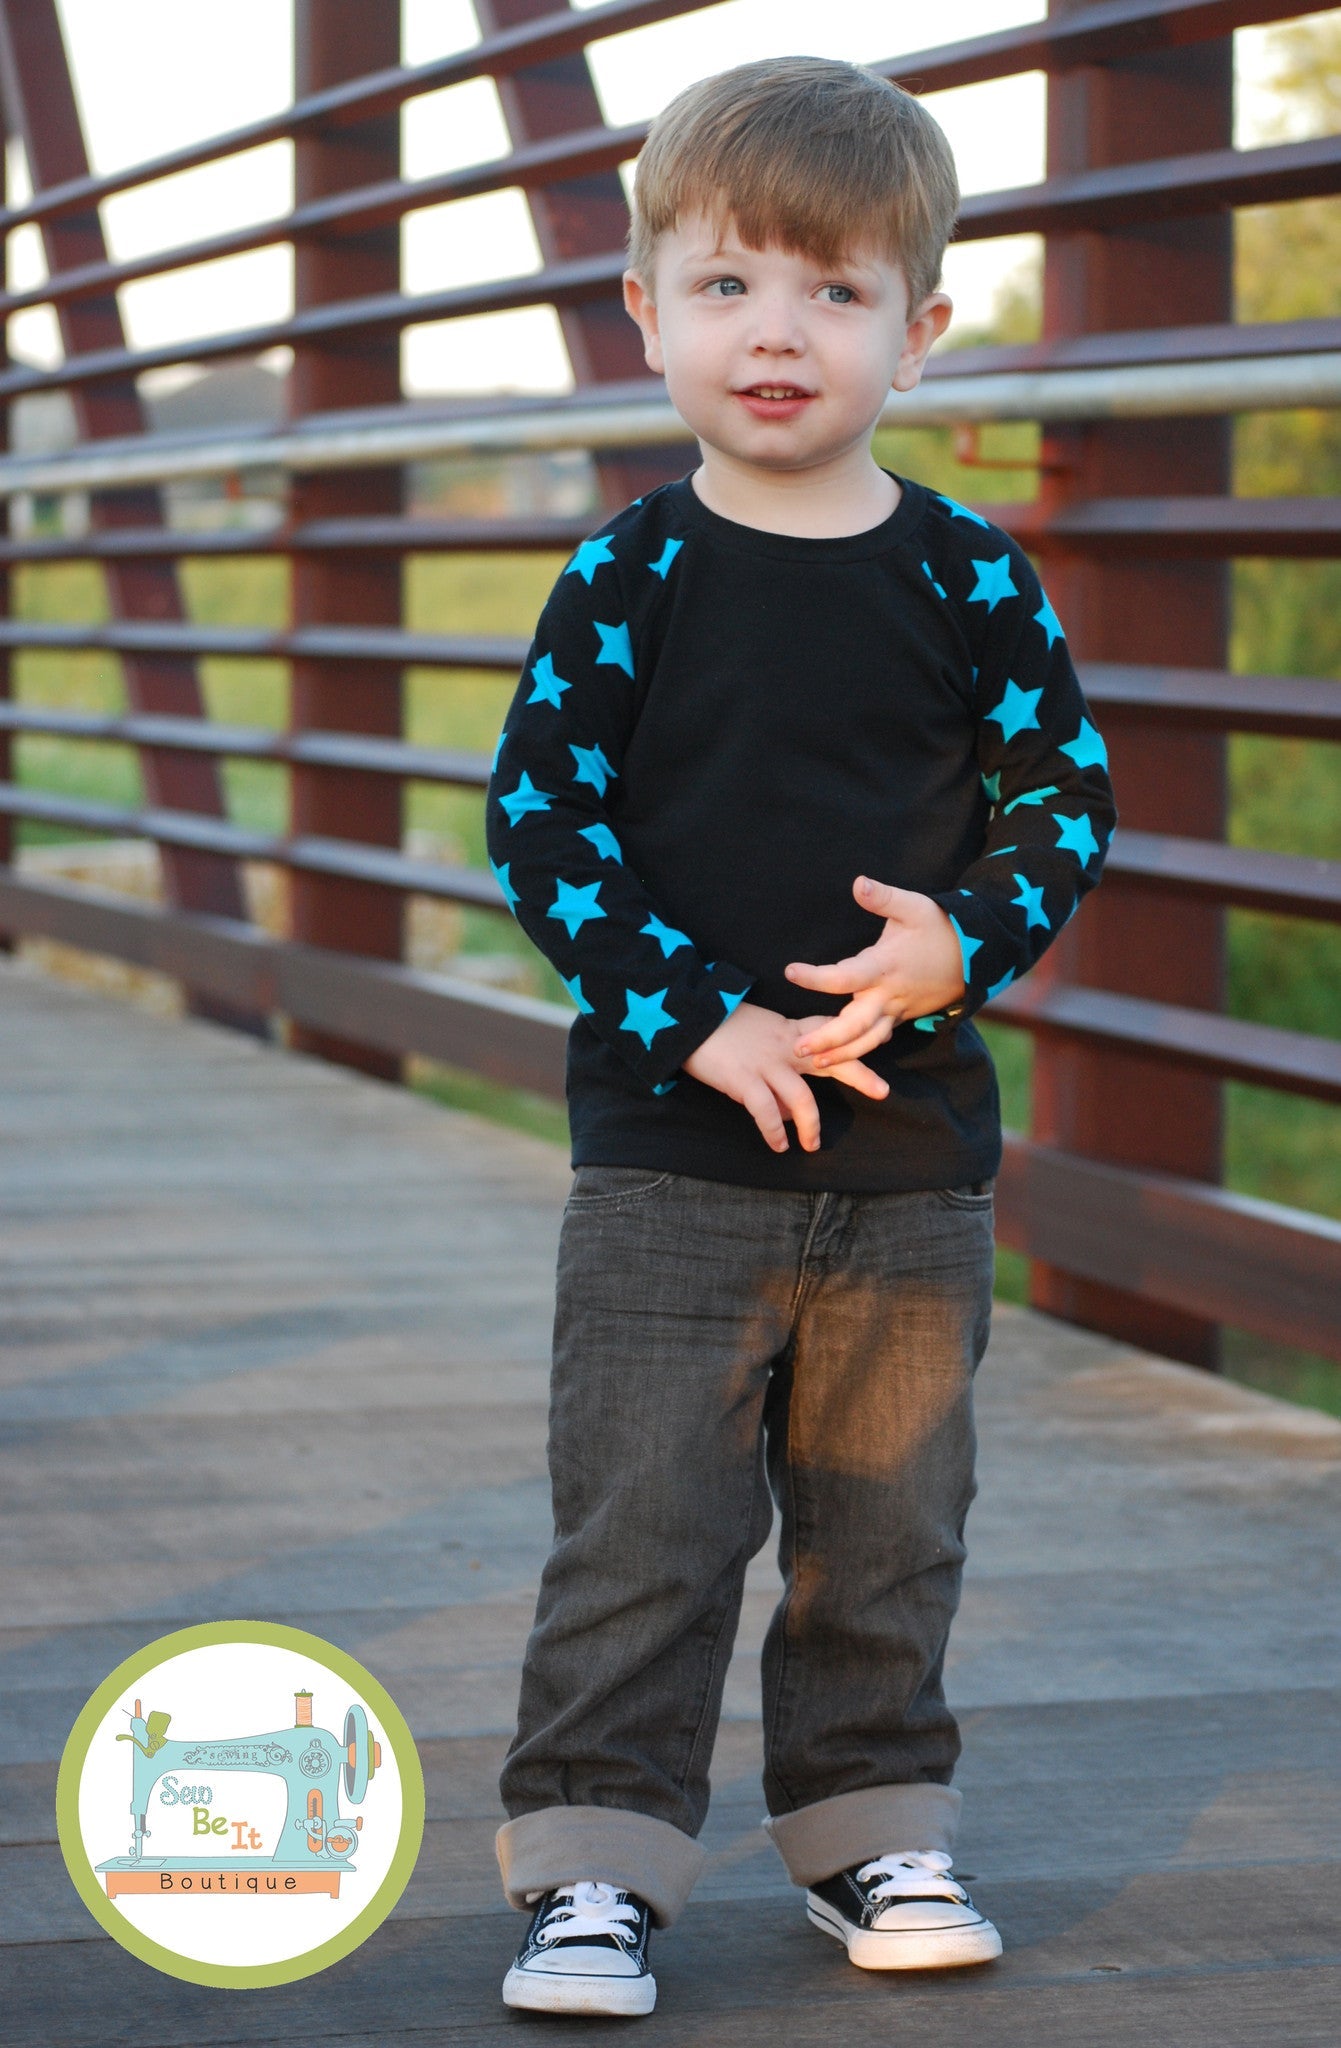 Max Raglan PDF SEWING PATTERN (Ears/wings/tails are not included in this pattern)